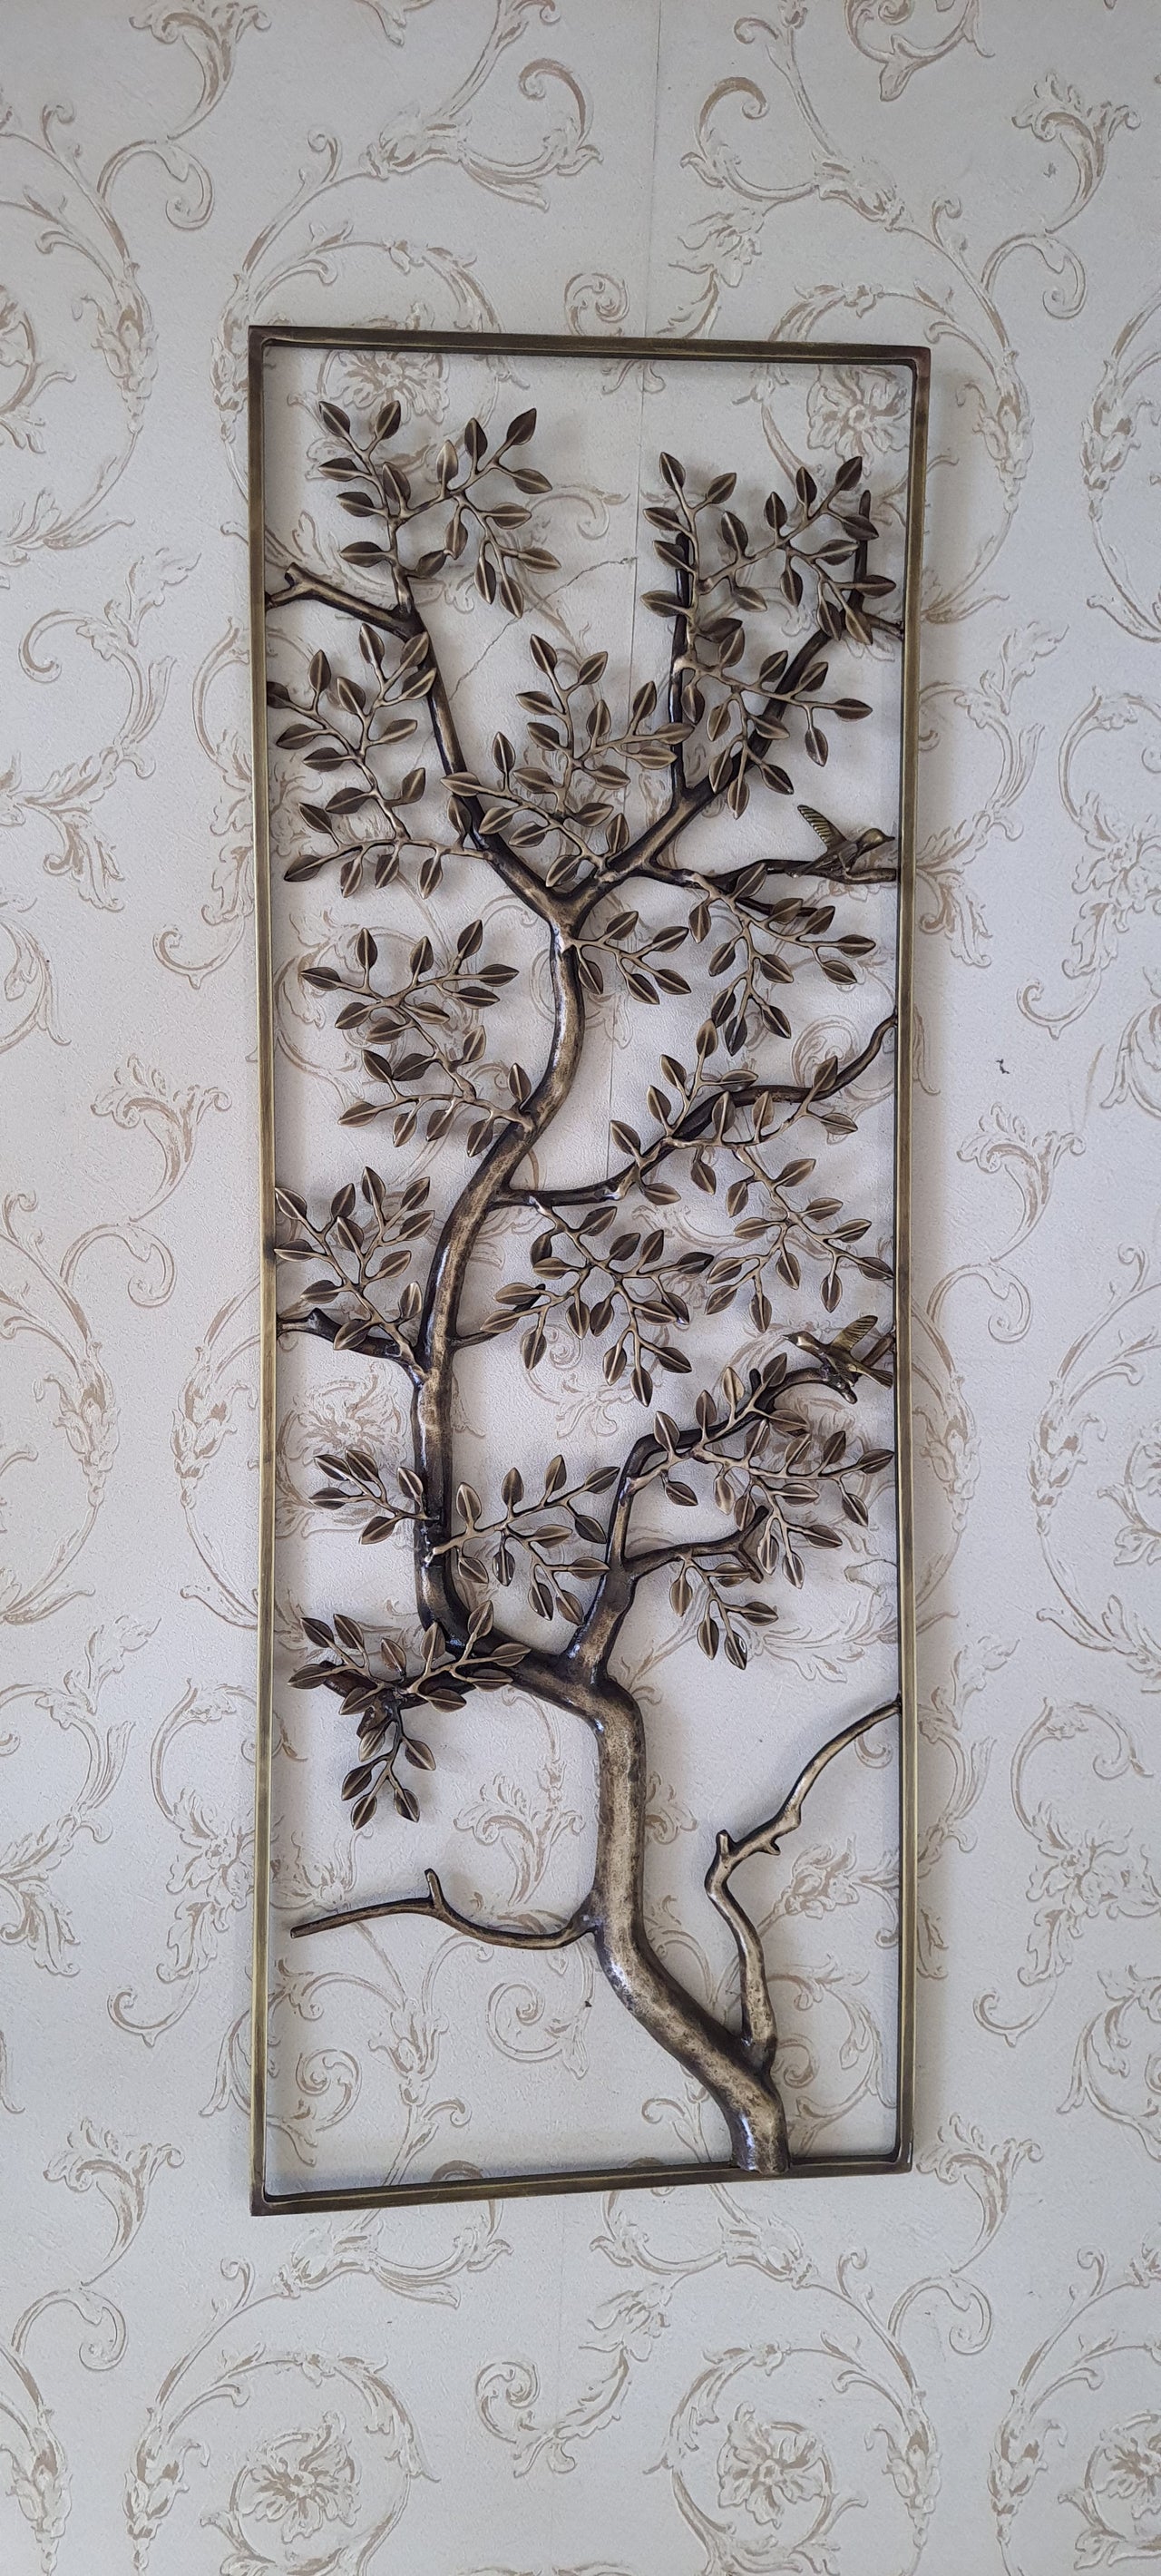 TREE IN A FRAME - 100% MADE FROM BRASS